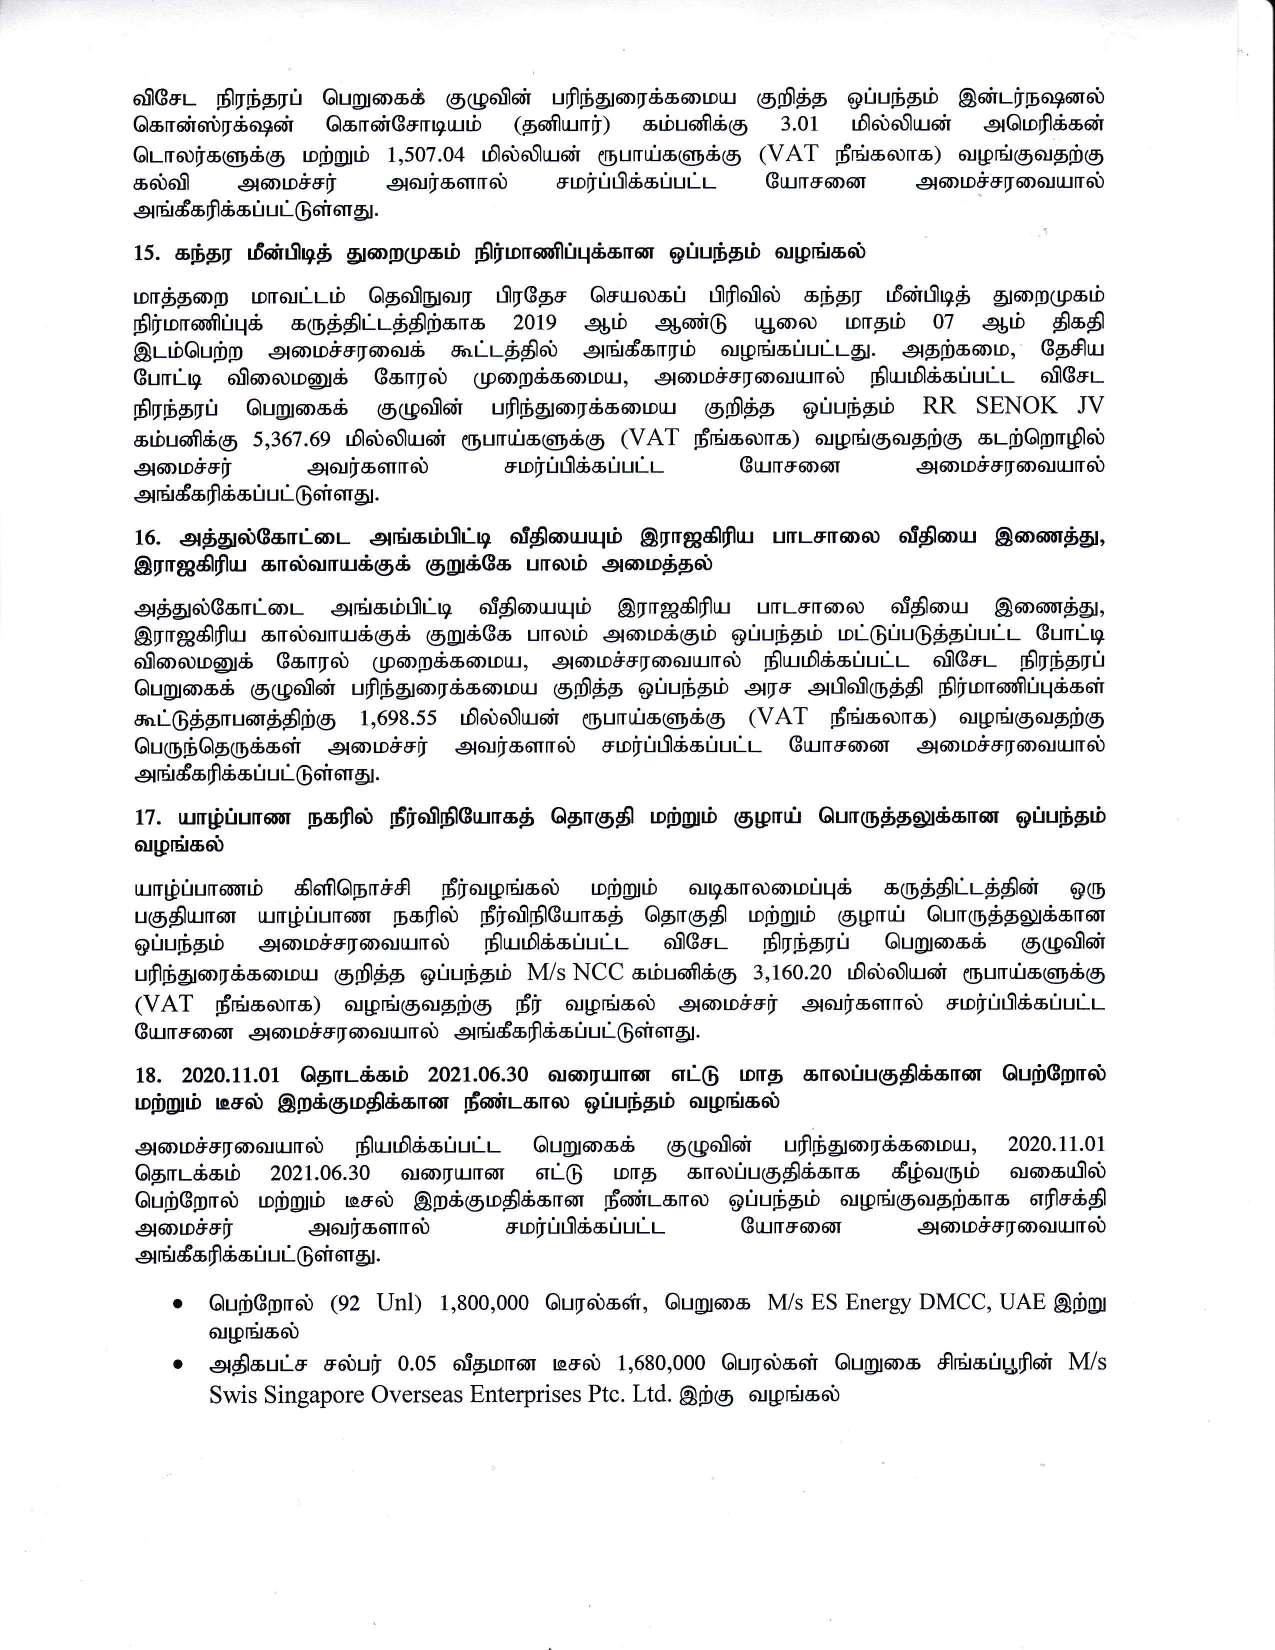 Cabinet Decsion on 09.11.2020 Tamil page 006